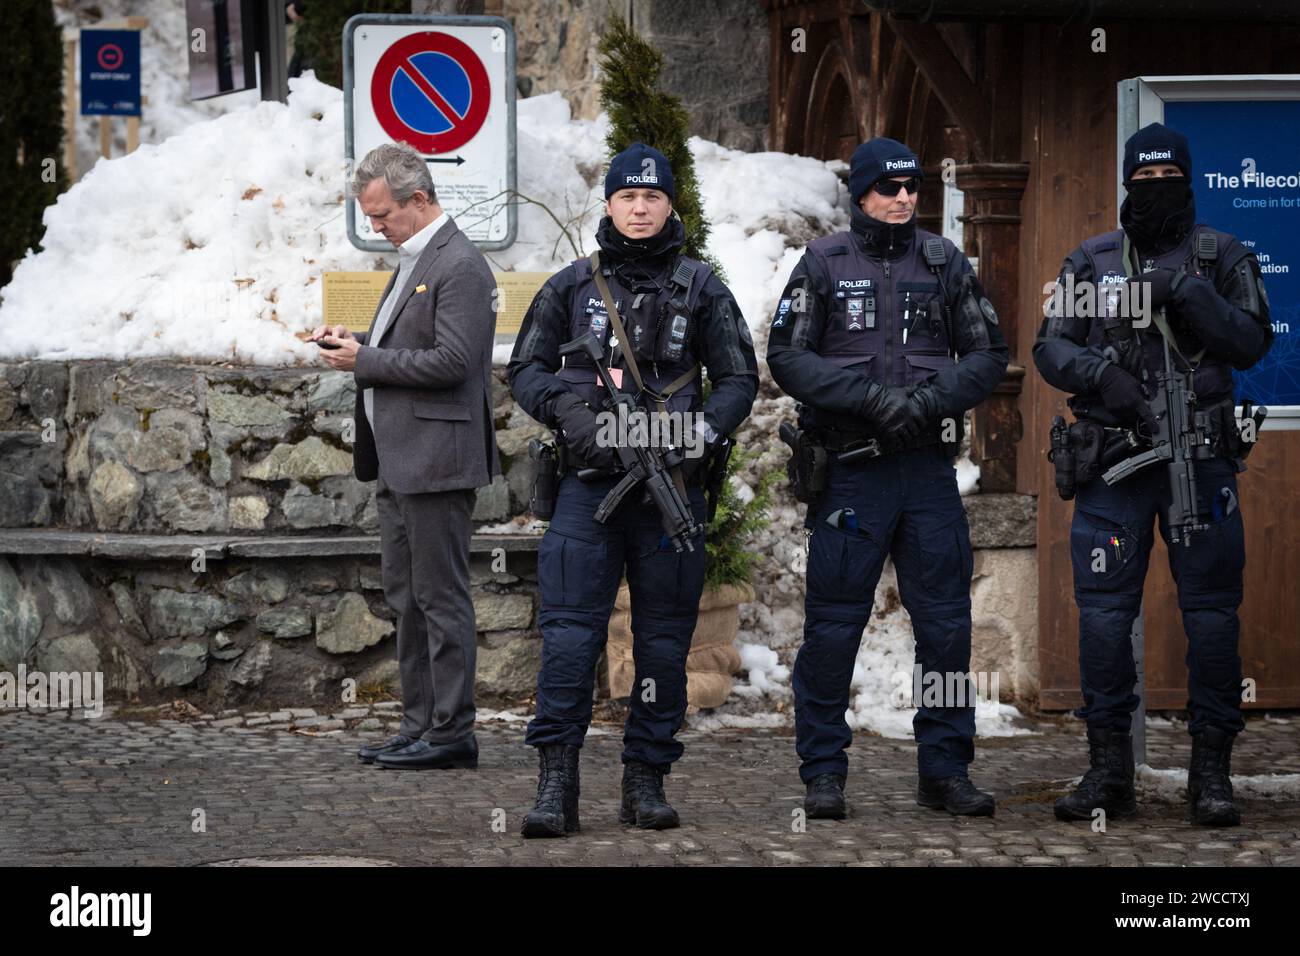 Davos, Switzerland. 15th Jan, 2024. Davos, CH 15 January, 2024. Armed police stand guard for the 54th World Economic Forum. The Federal Assembly has also authorised deploying up to 5000 armed personnel during the week-long WEF event that brings global leaders and industries together to shape the world's future. Credit: Andy Barton/Alamy Live News Stock Photo